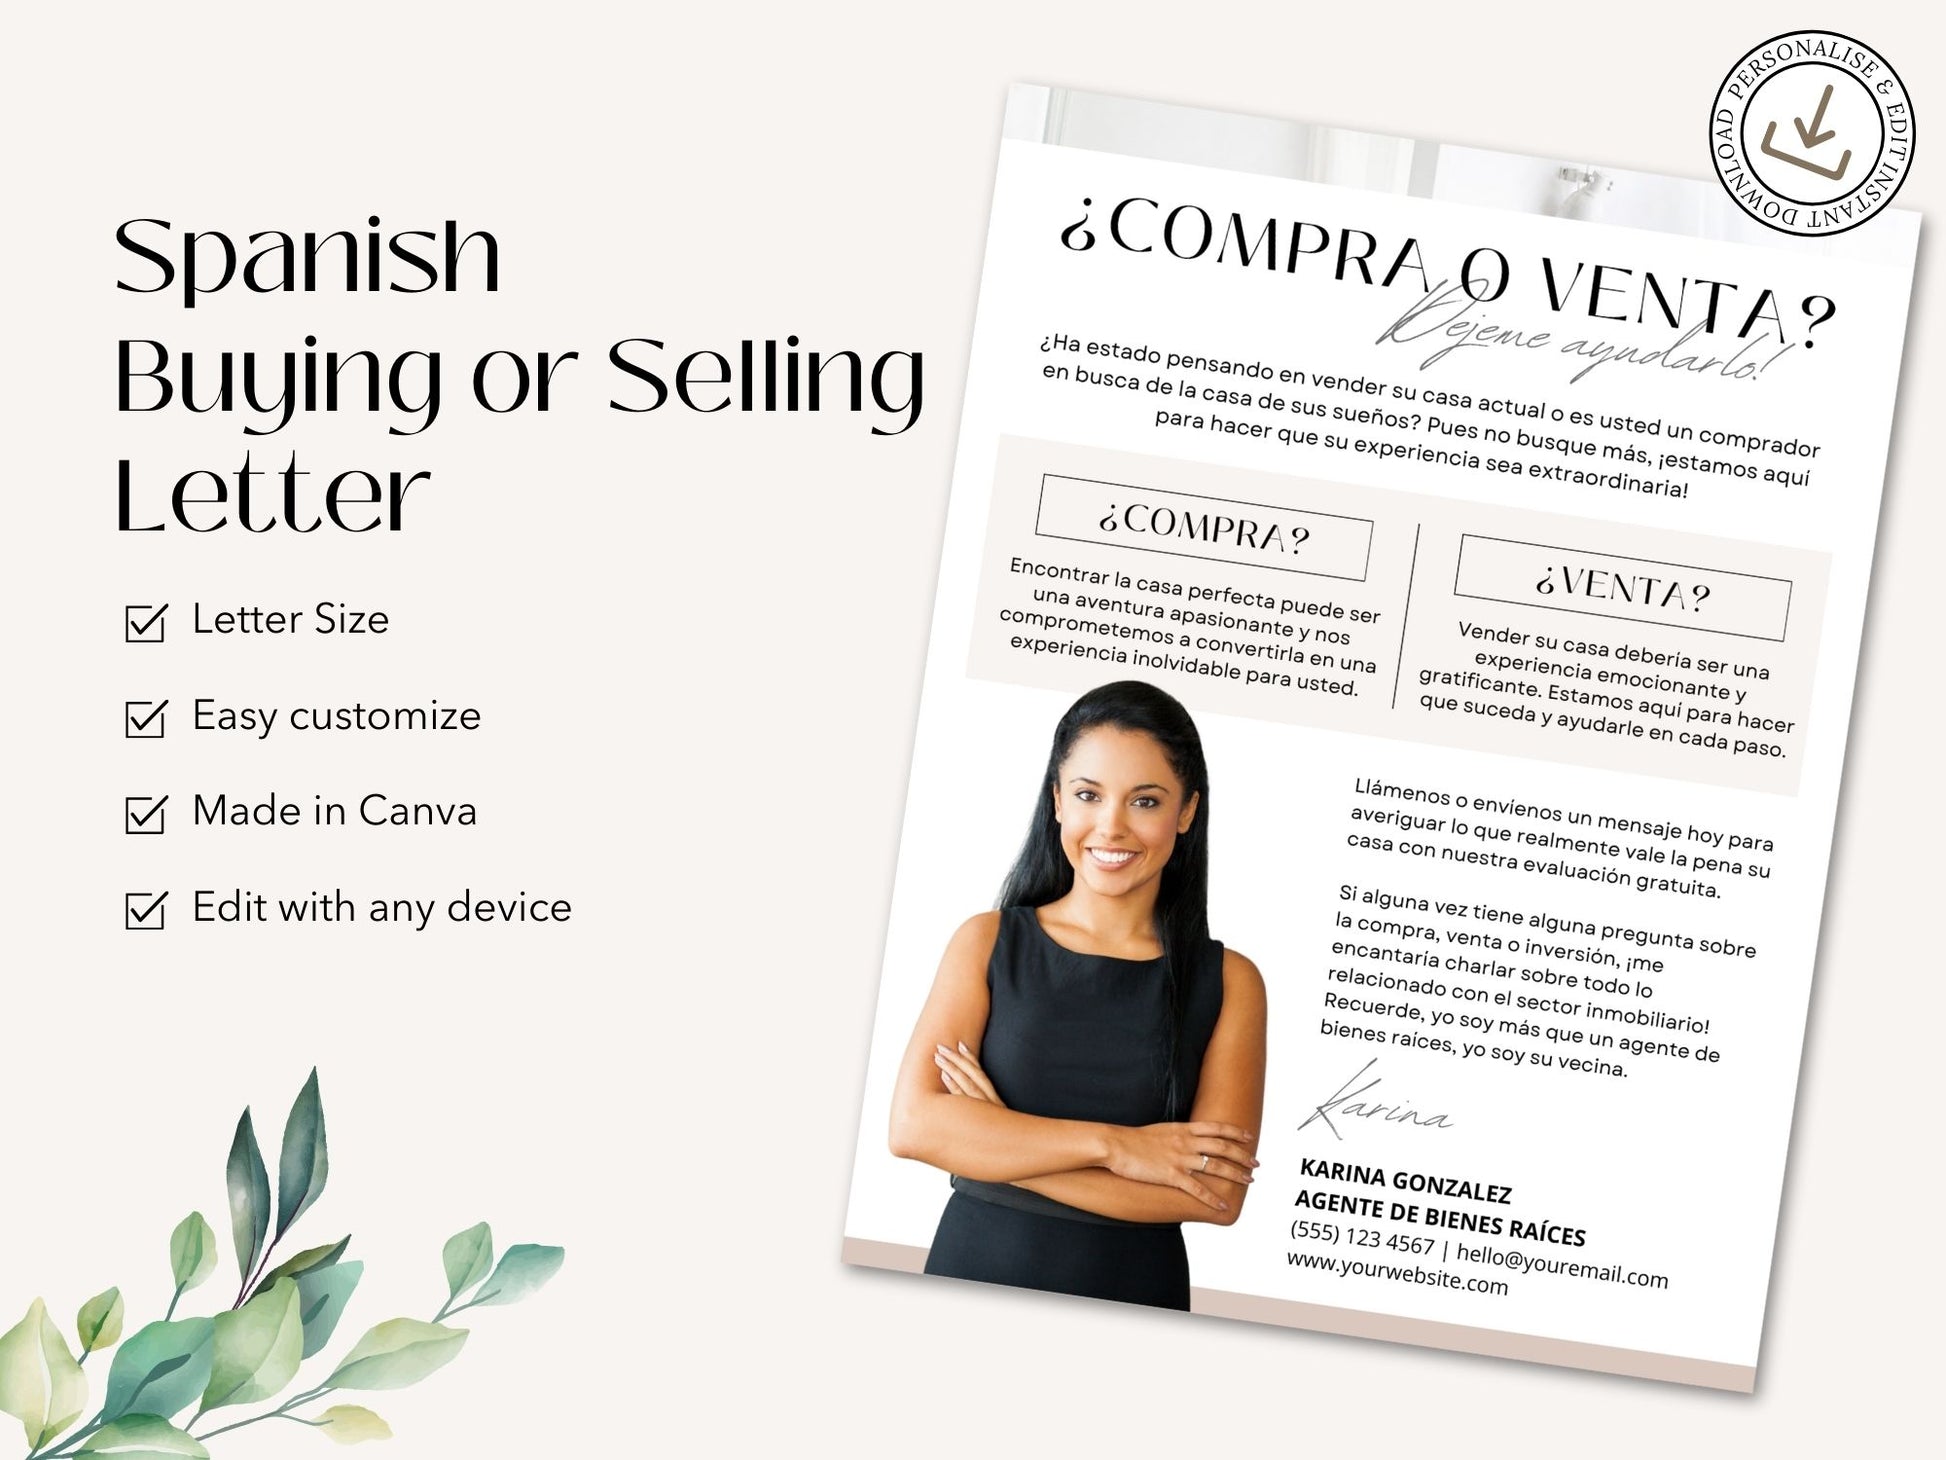 Spanish Buying or Selling Real Estate Letter Vol. 02 - Instill confidence when buying or selling properties with a personalized introduction, clear guidance, and professional real estate services